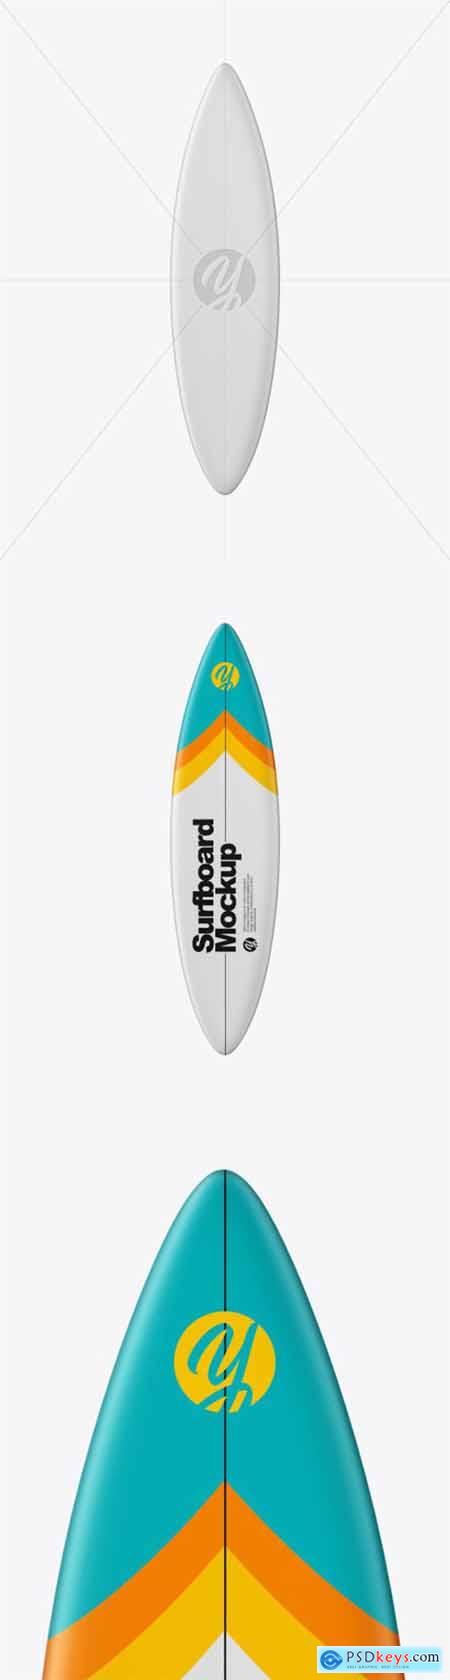 Download Surfboard Mockup - Front View 51856 » Free Download ...